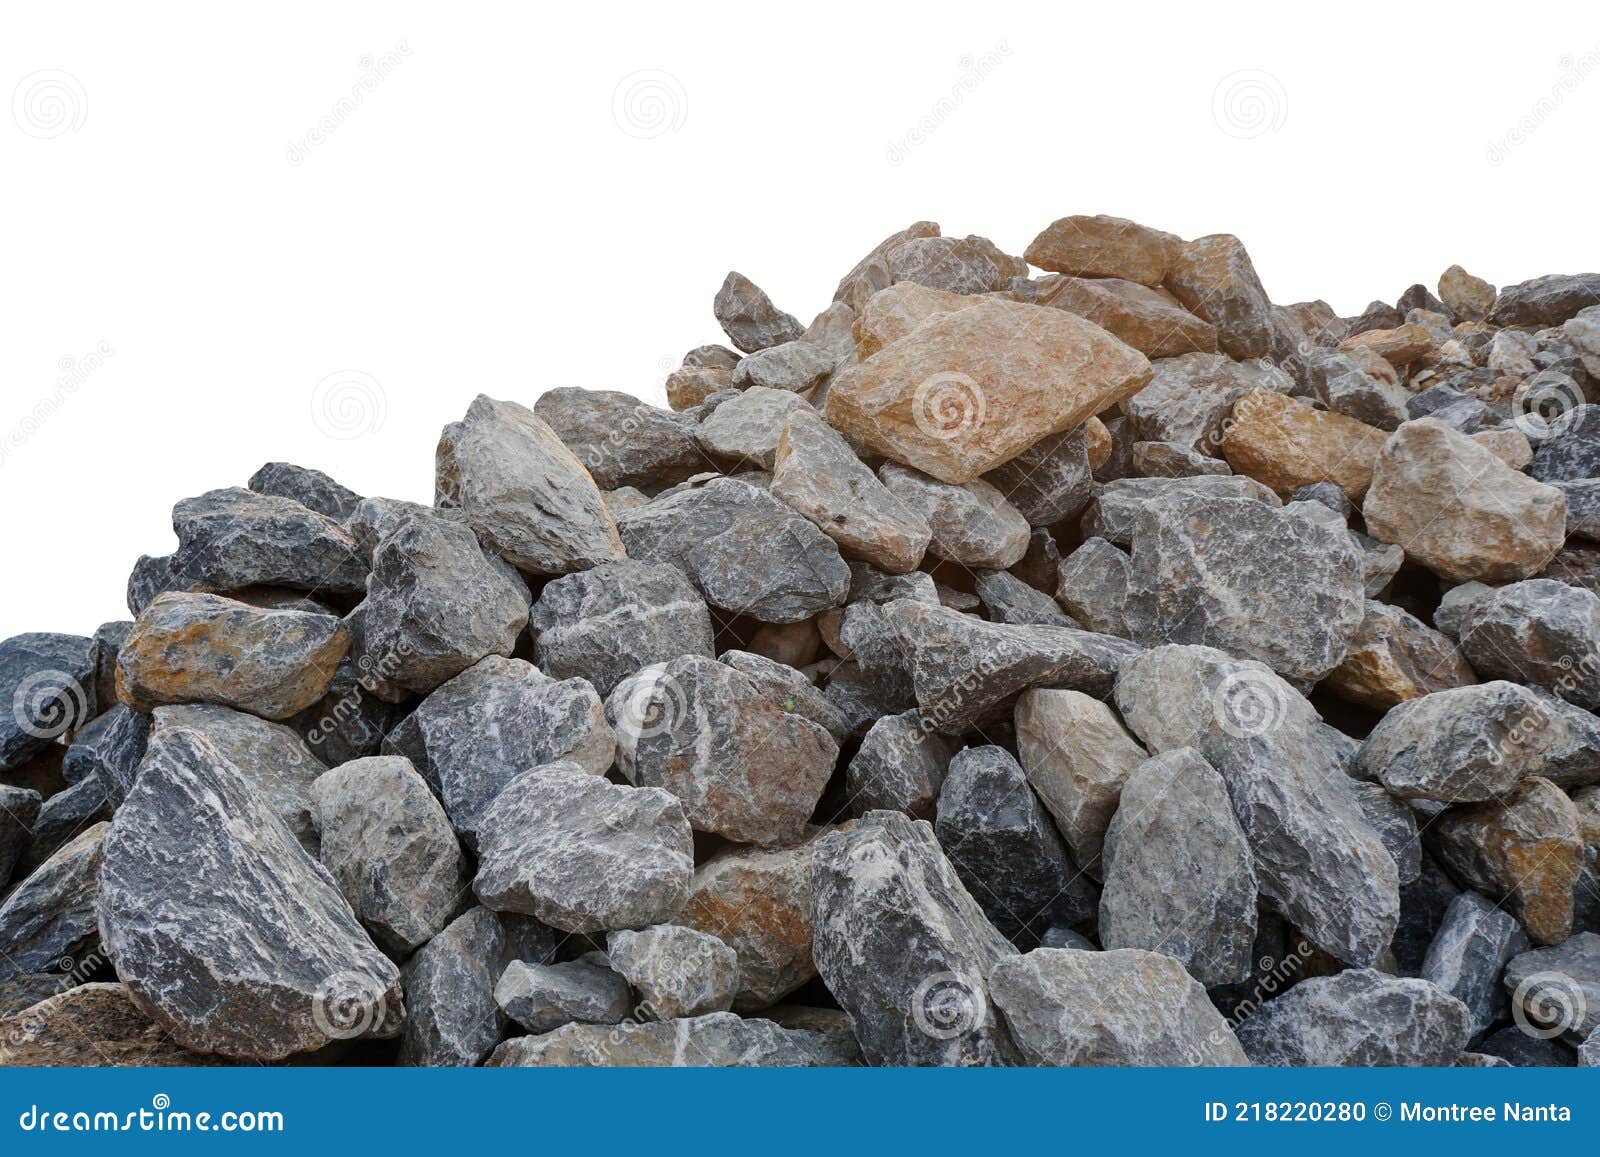 25,880 Small Pile Rocks Images, Stock Photos, 3D objects